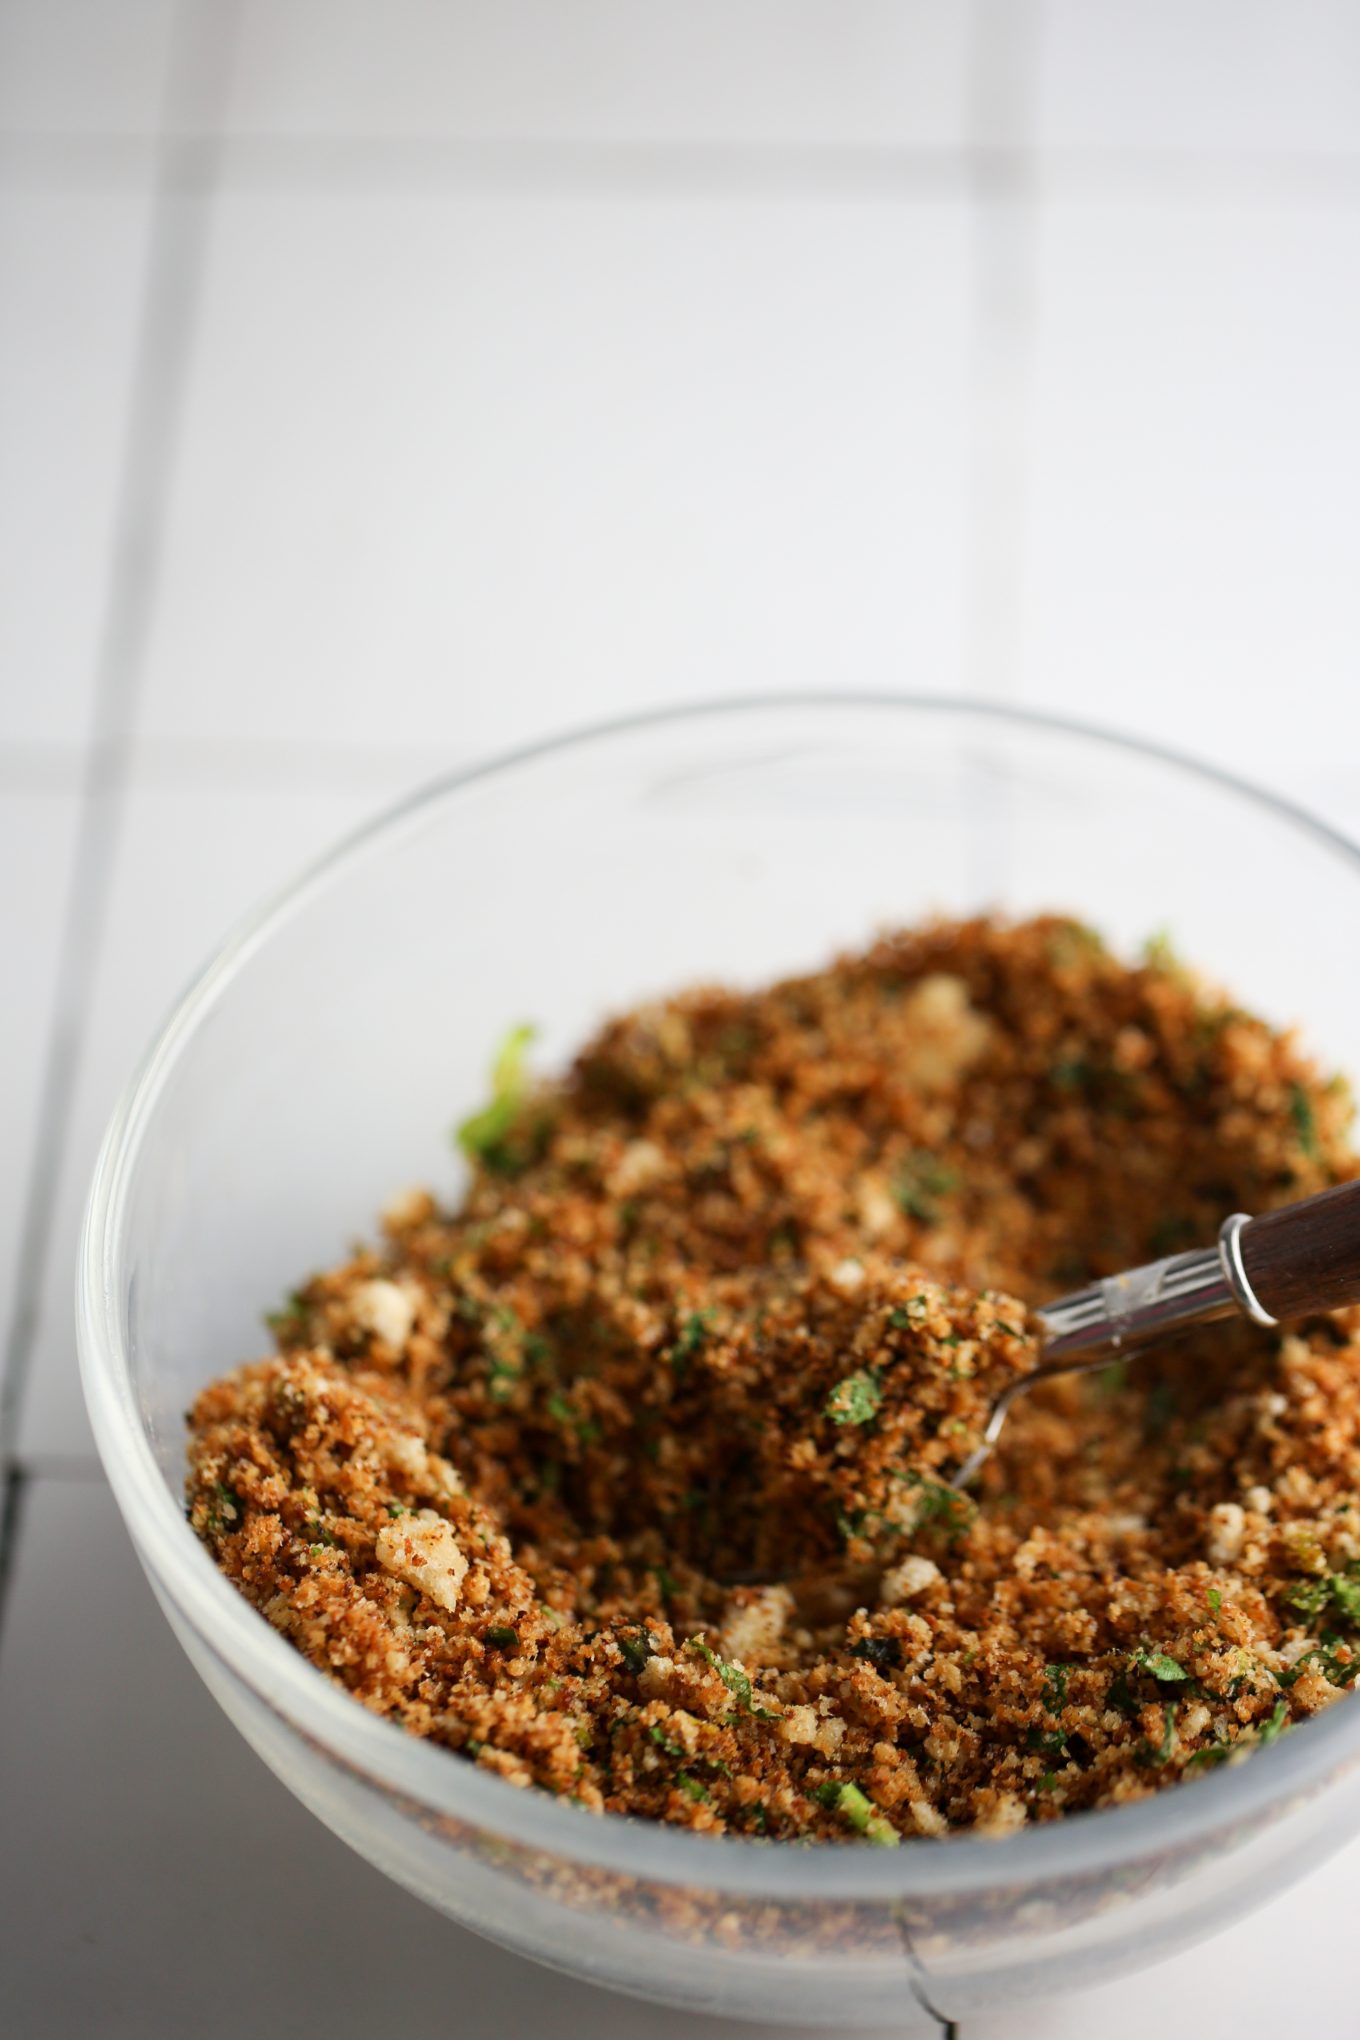 seasoned bread crumbs with spices and fresh herbs.